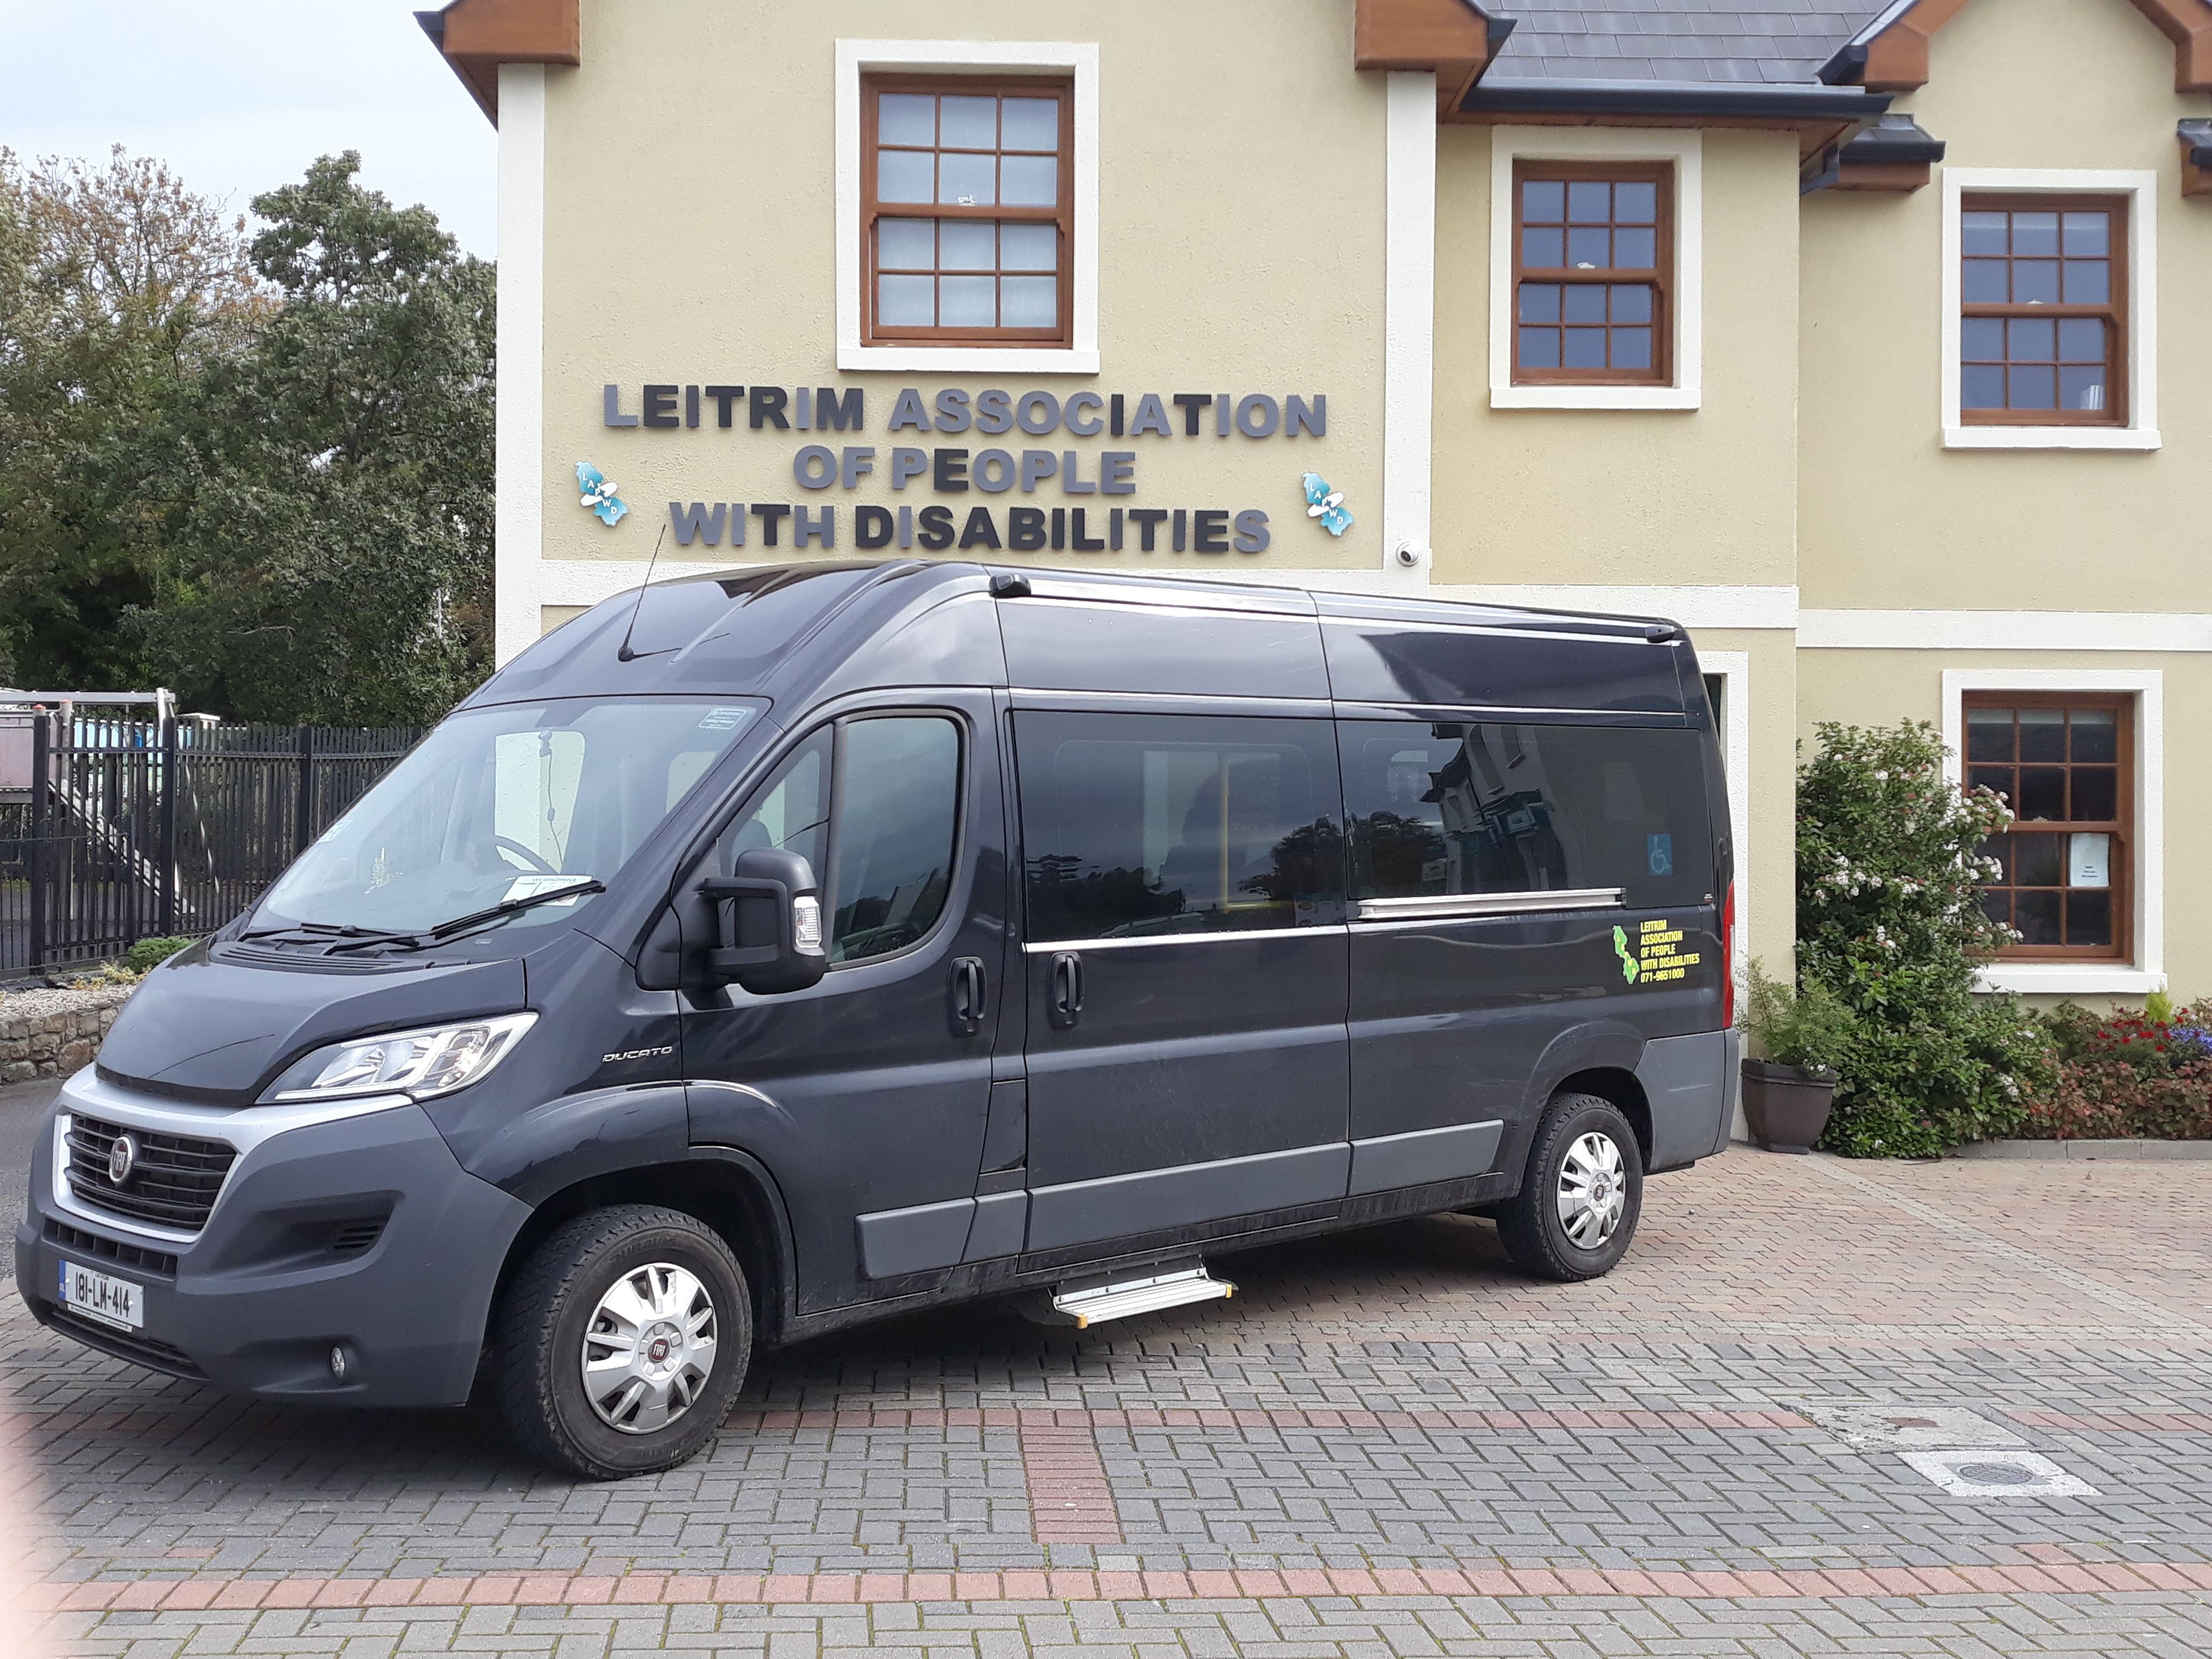 Accessible Transport is available to members on request